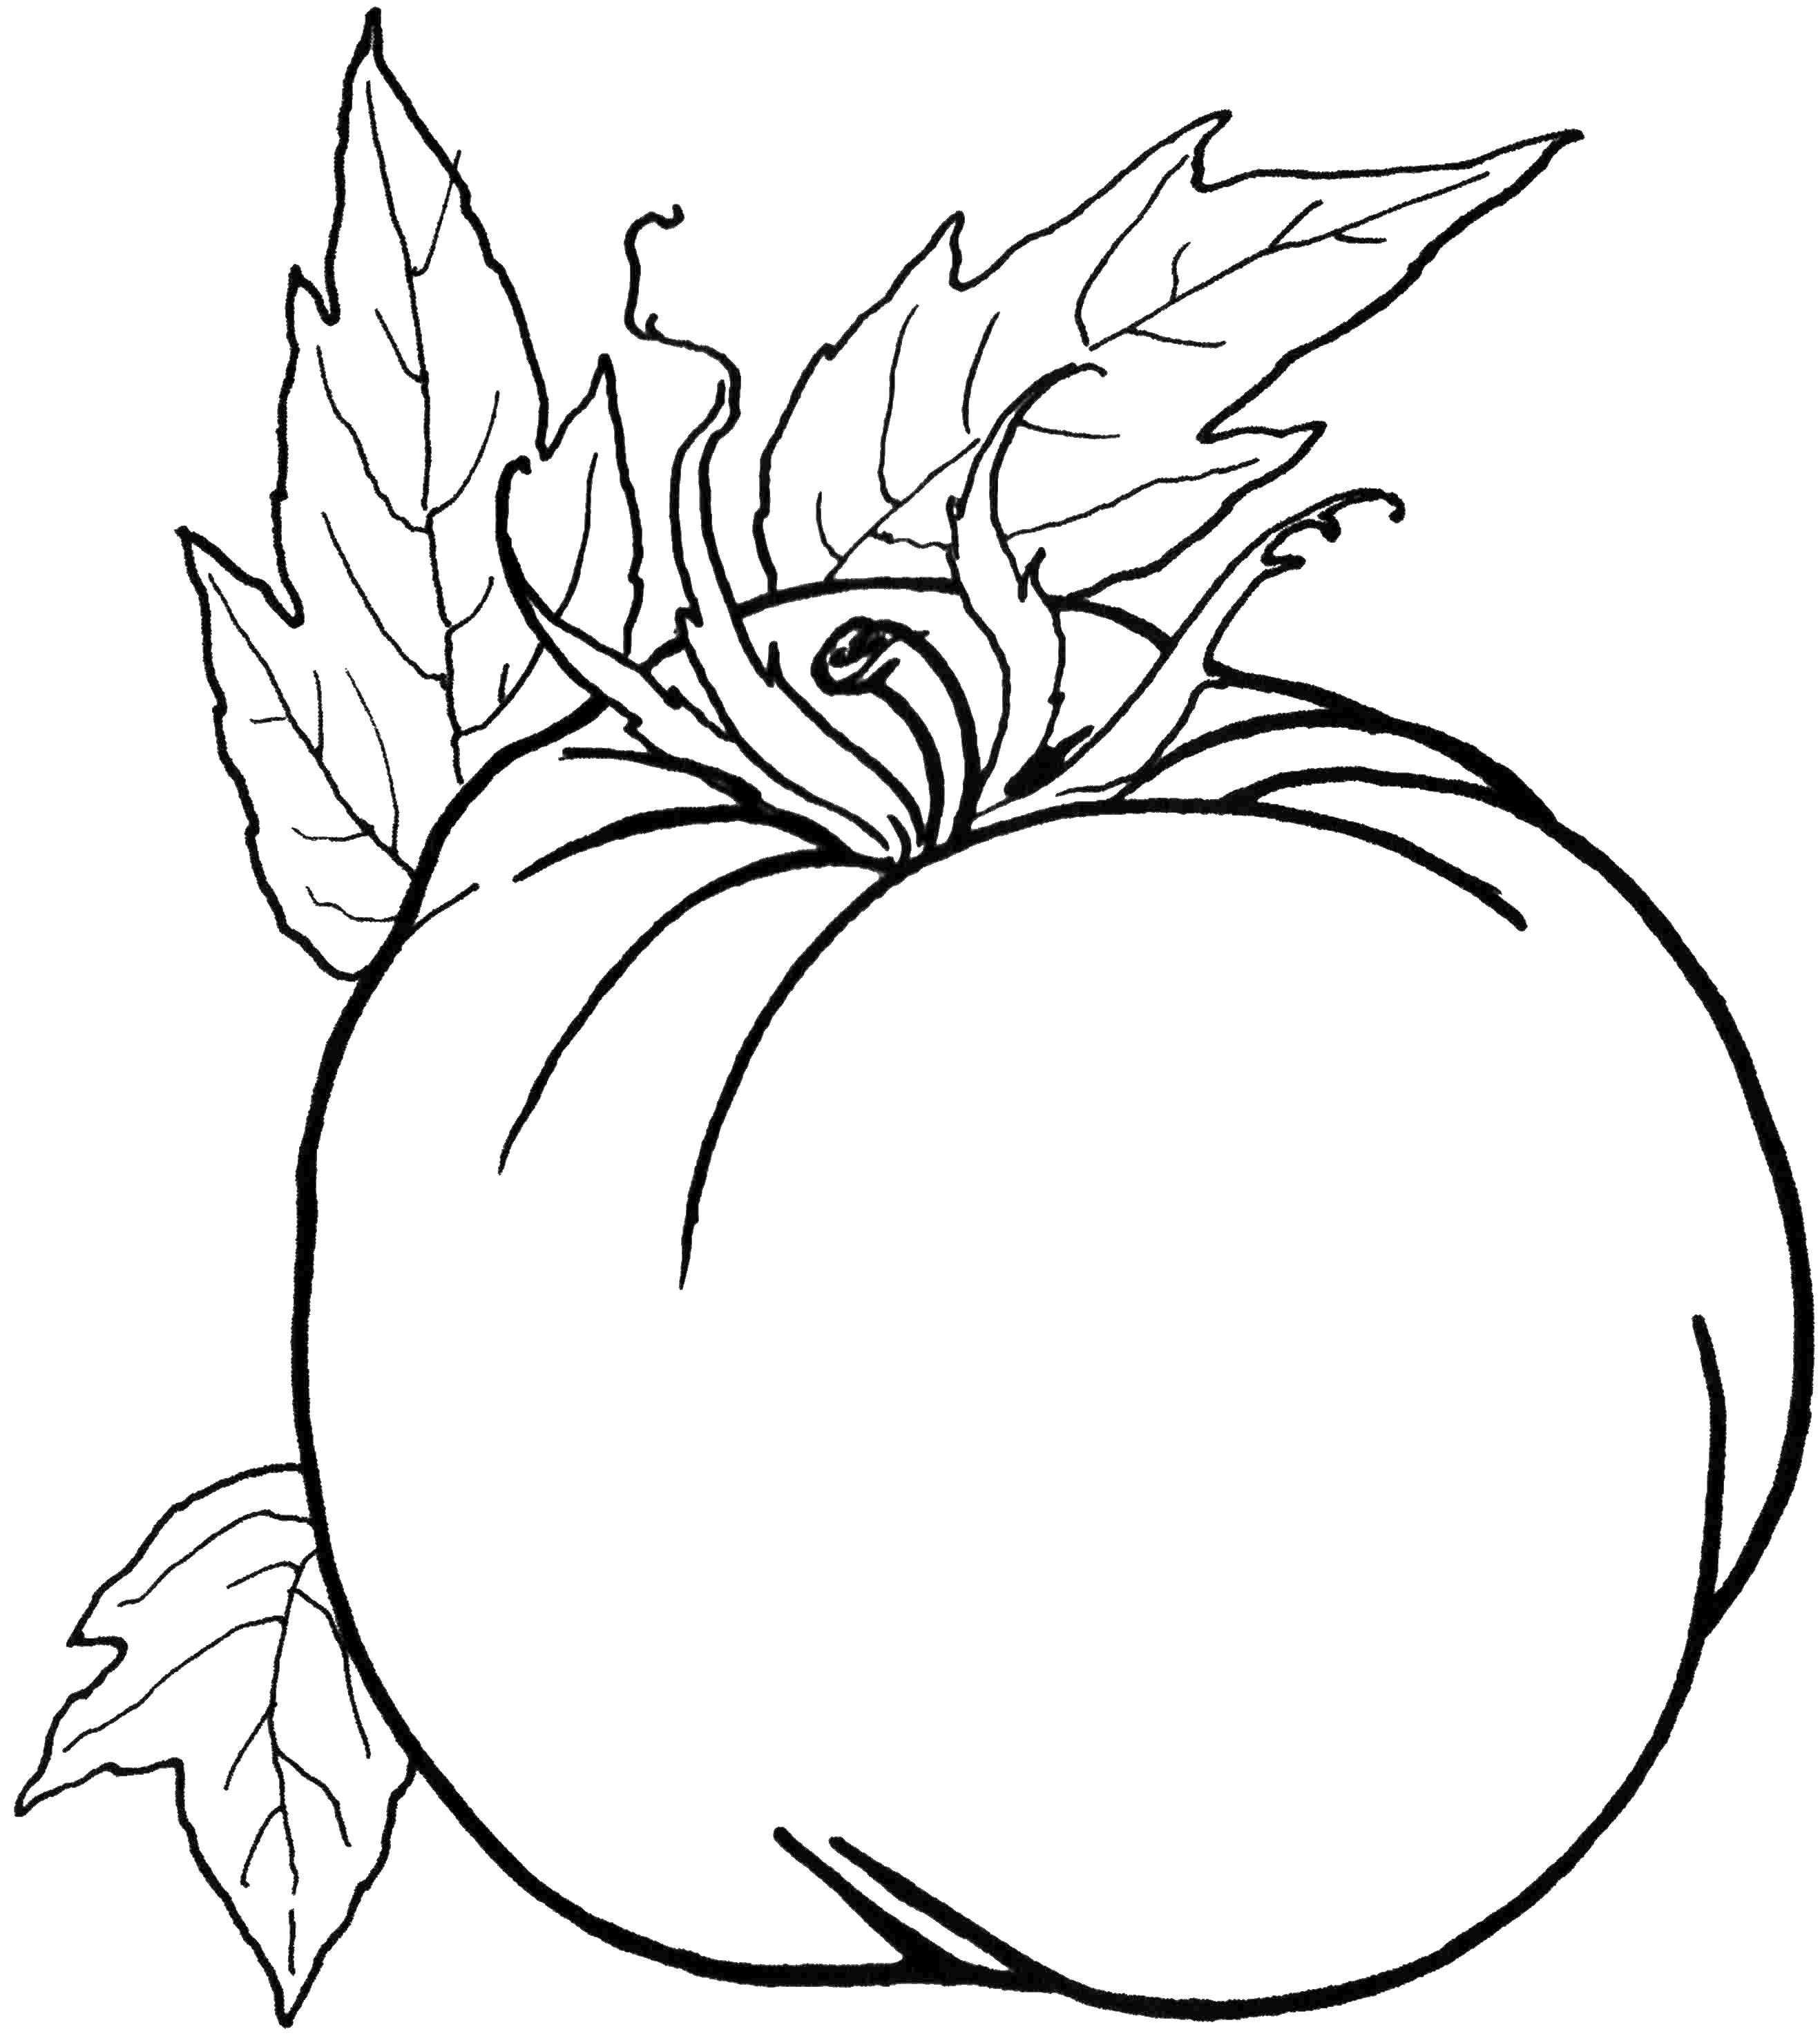 Coloring The fruit of tomato. Category Vegetables. Tags:  Vegetables.